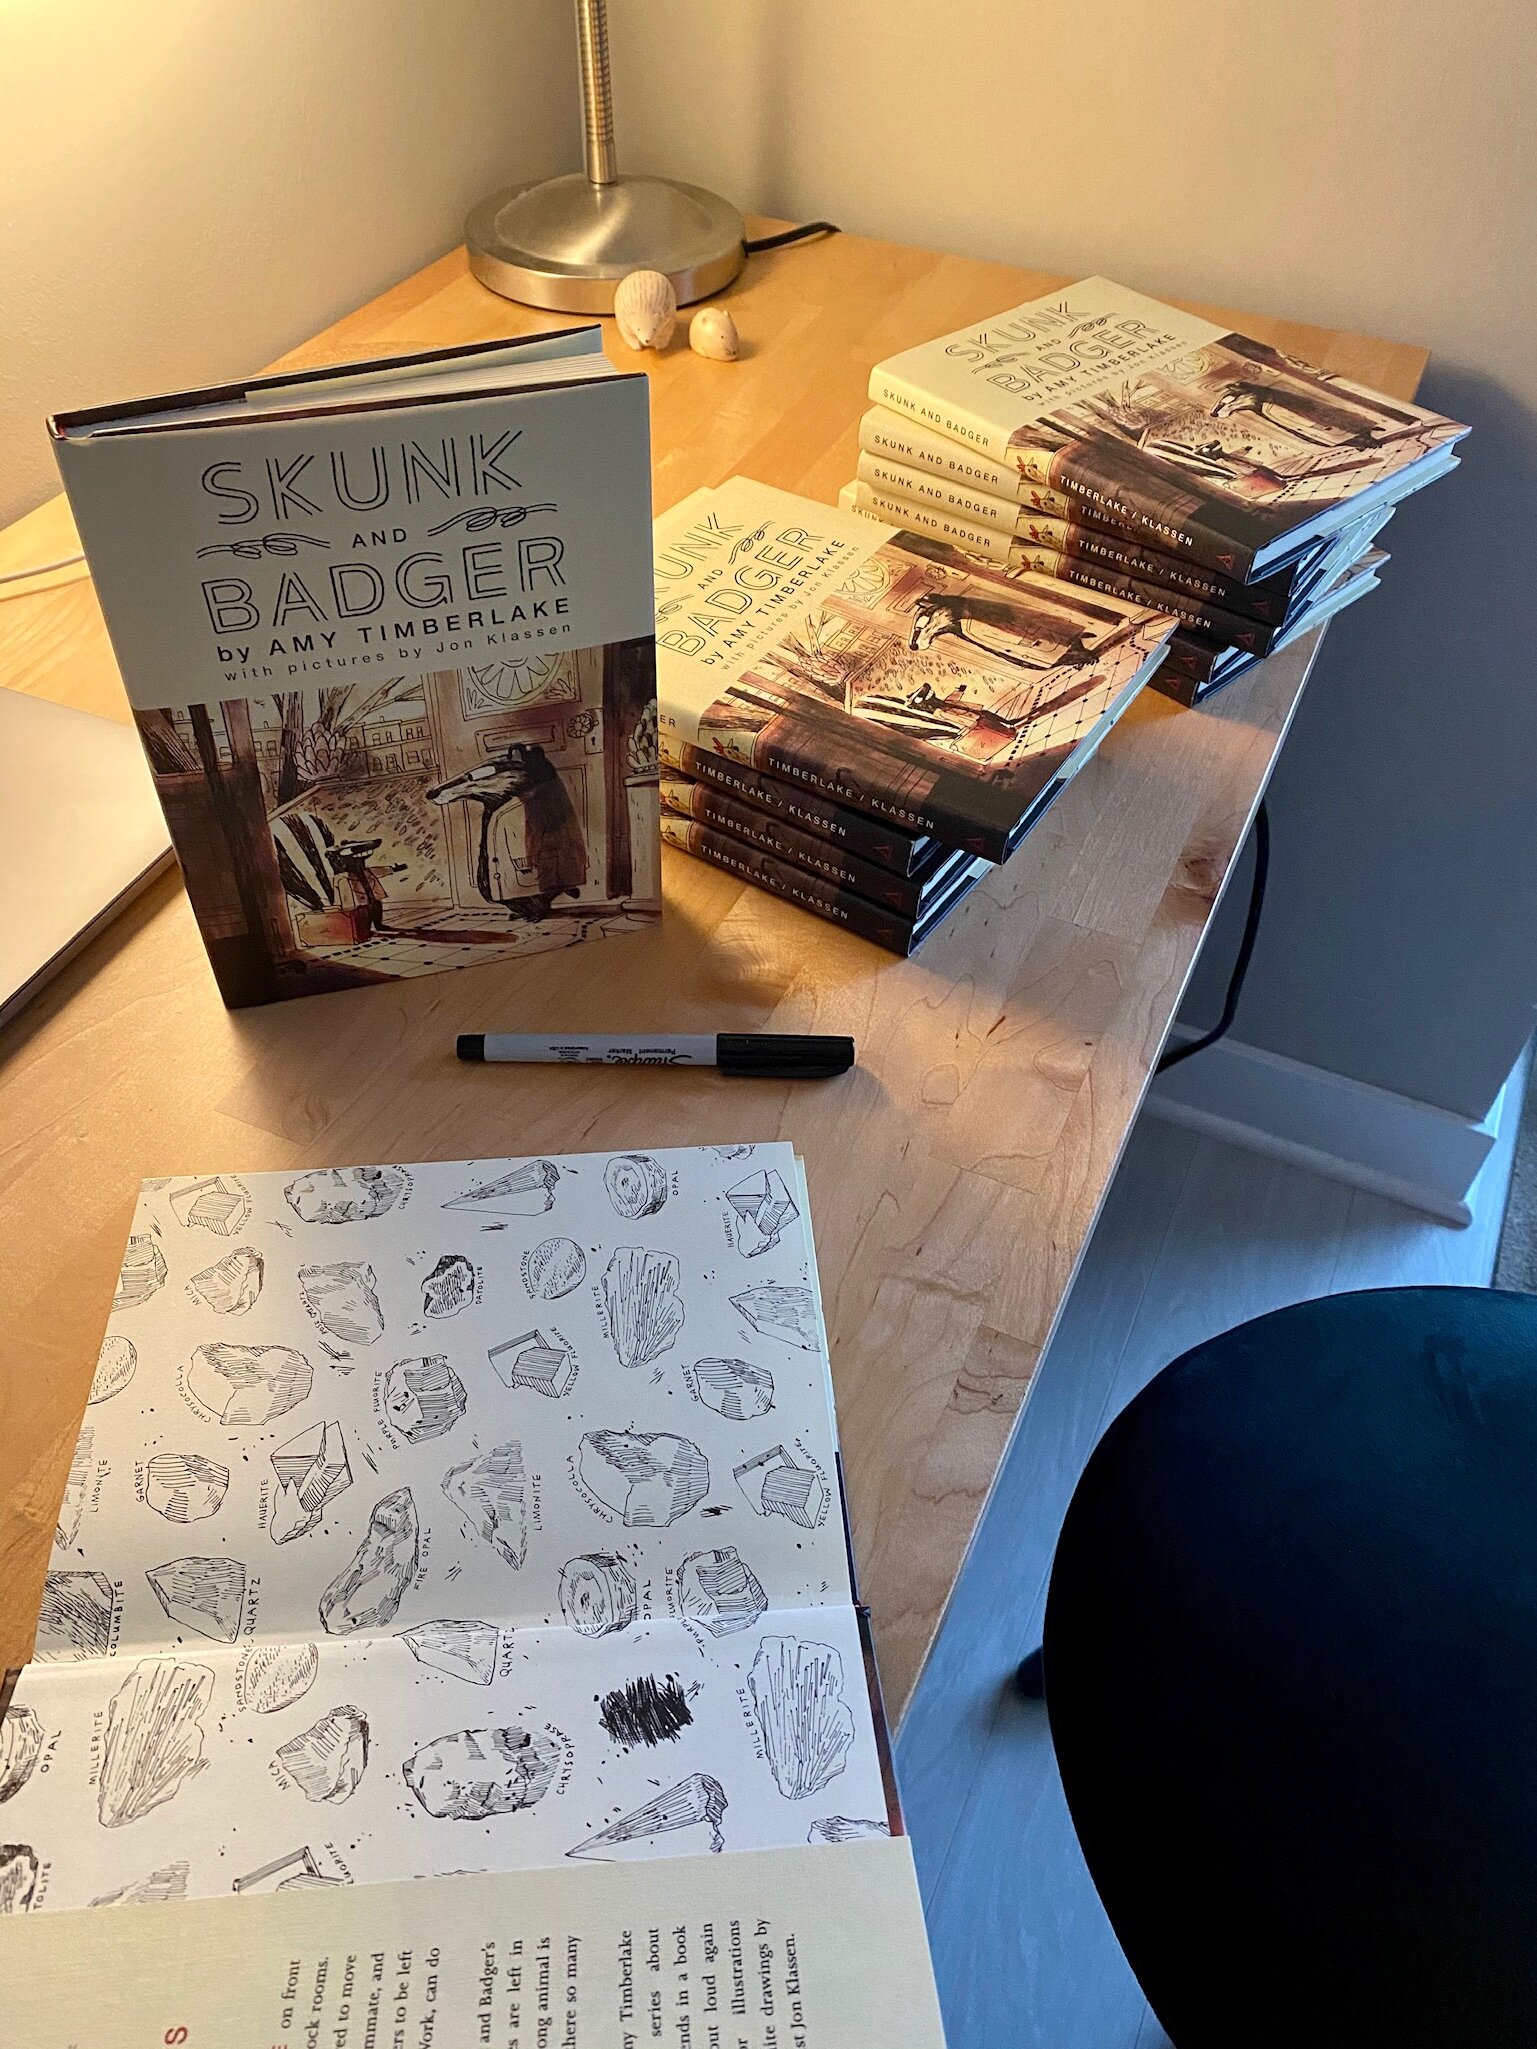 Signing books for The Book Cellar on a Rainy Morning